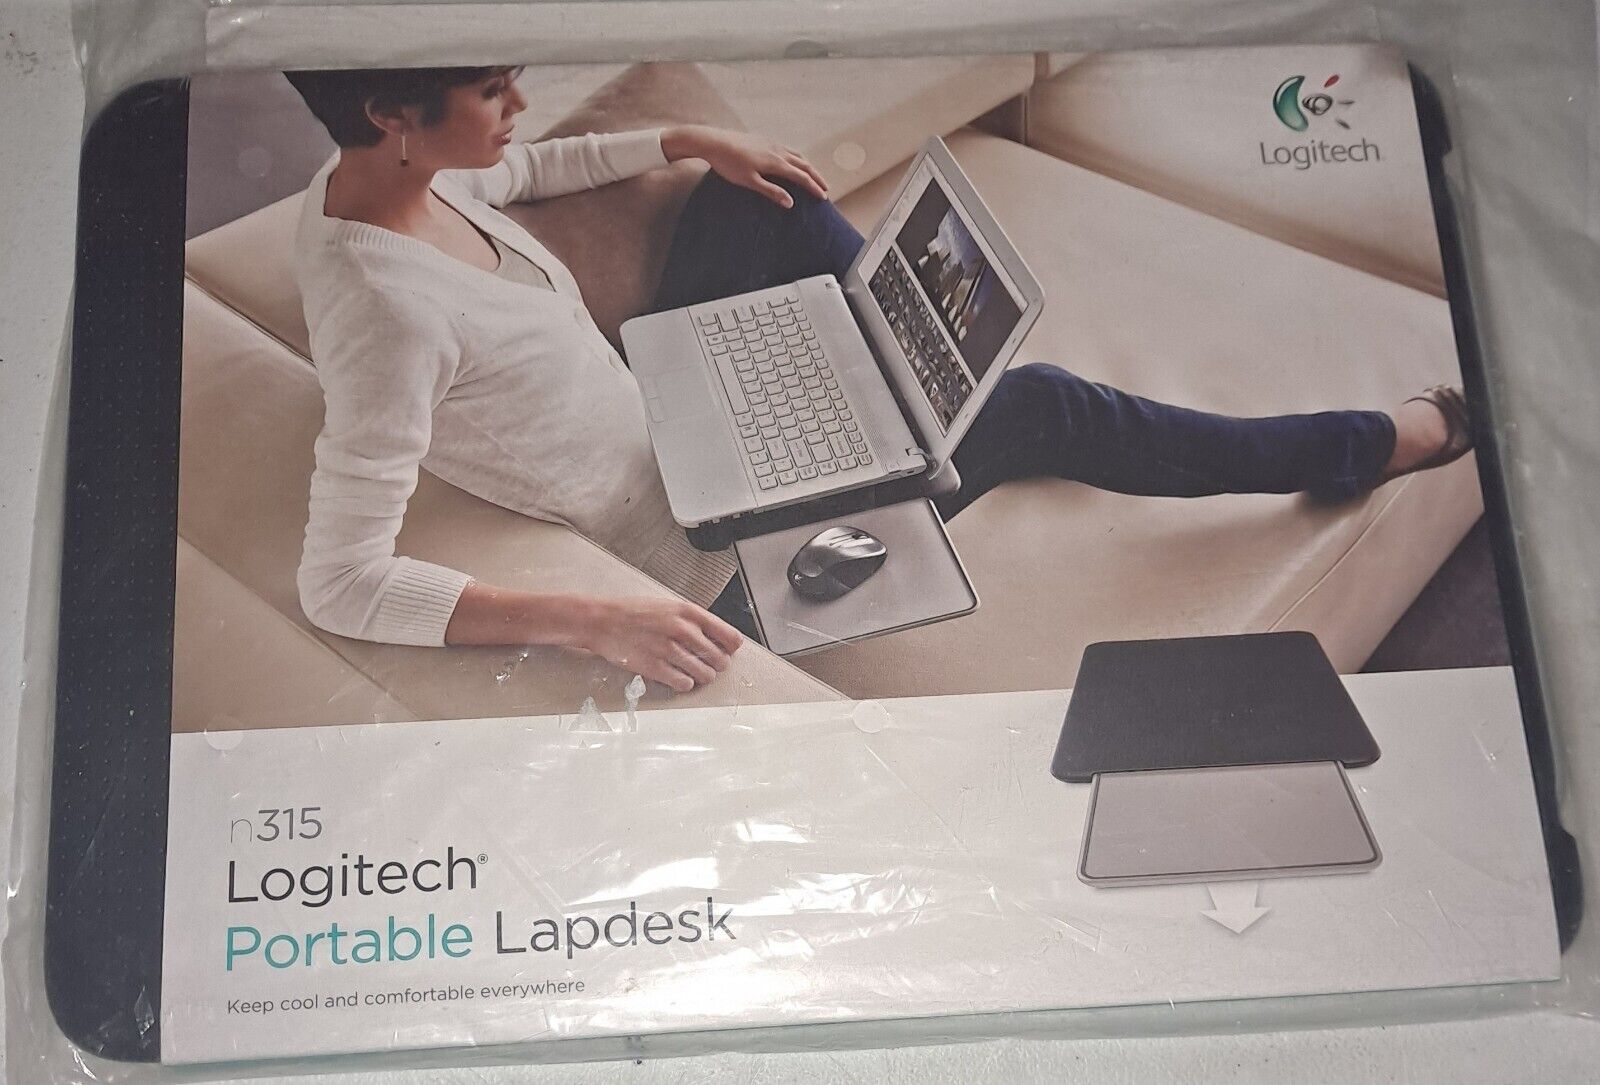 Logitech n315 Portable LapDesk with Slide Out Mouse Pad Laptop Accessory